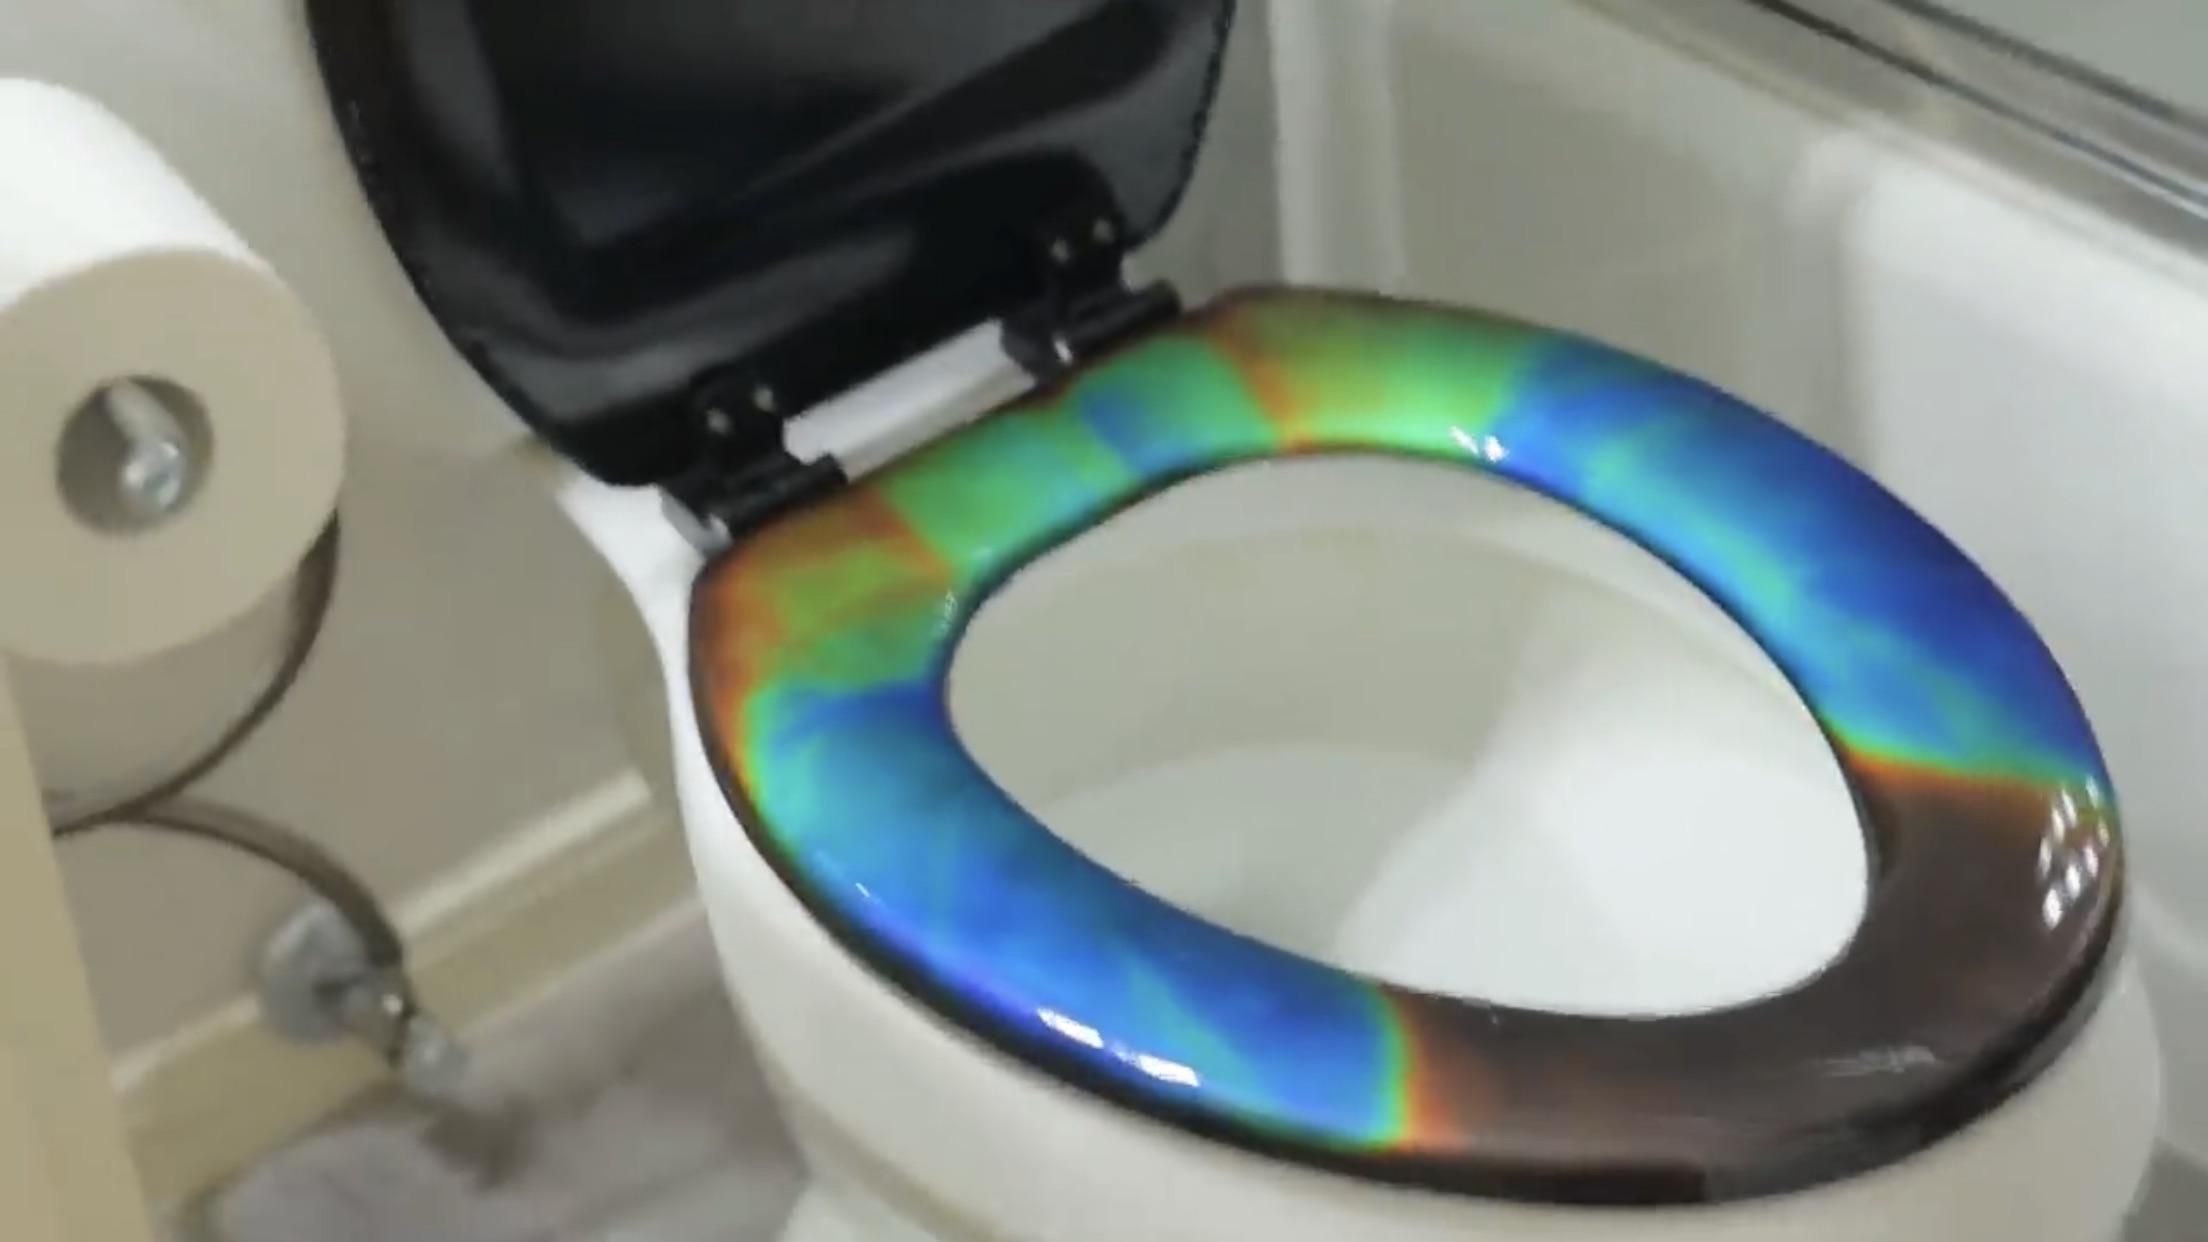 Someone made a mood ring toilet seat and now I can’t stop thinking that I want one.